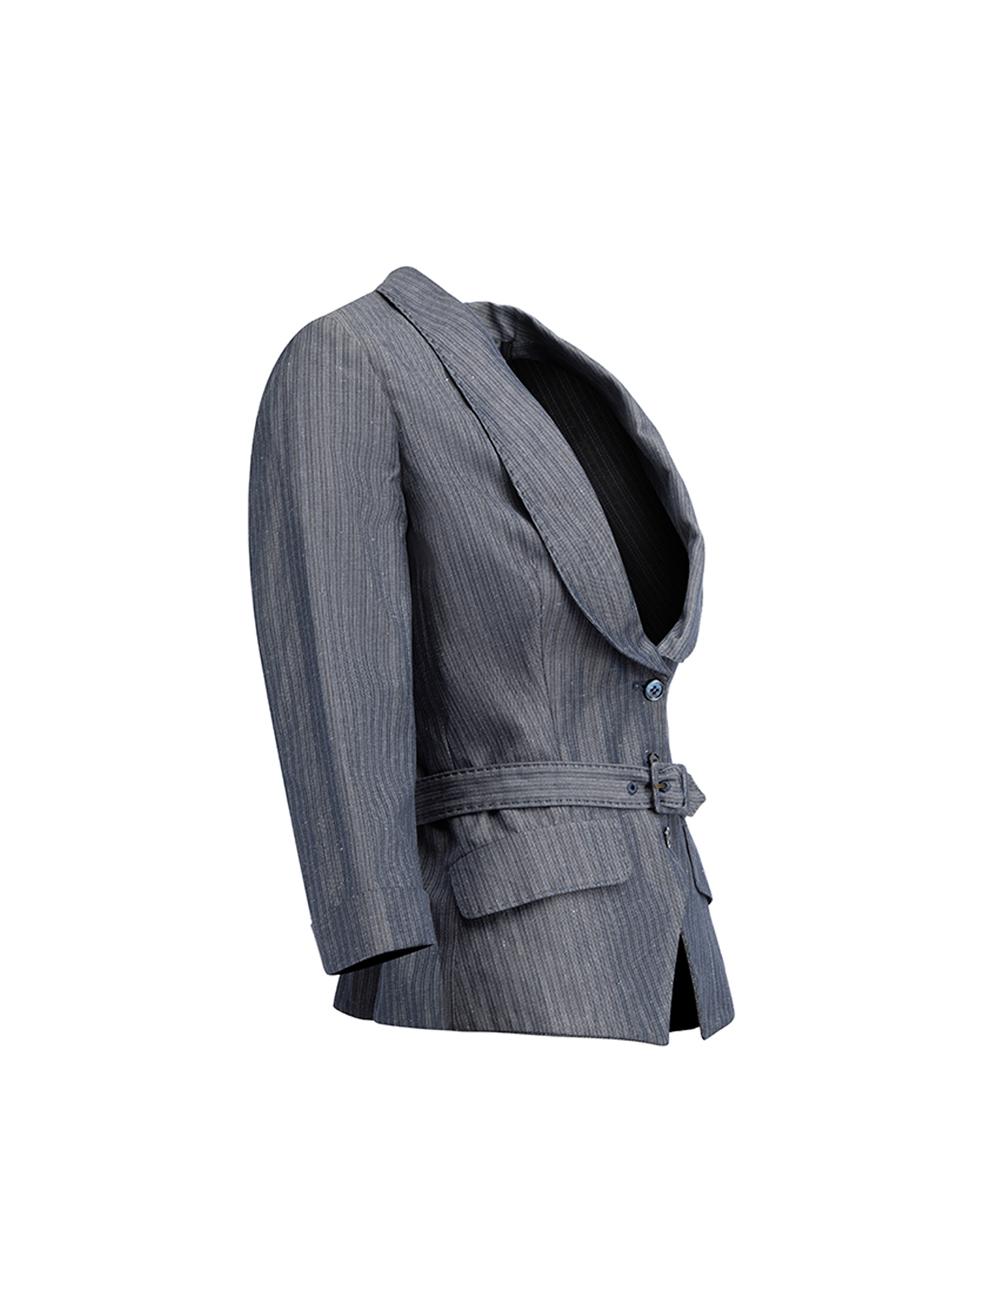 CONDITION is Very good. Hardly any visible wear to jacket is evident. Minimal pilling to exterior fabric on this used Alexander McQueen designer resale item. Details Greyish navy Cotton Pinstripe pattern Fitted blazer Mid length sleeve Single